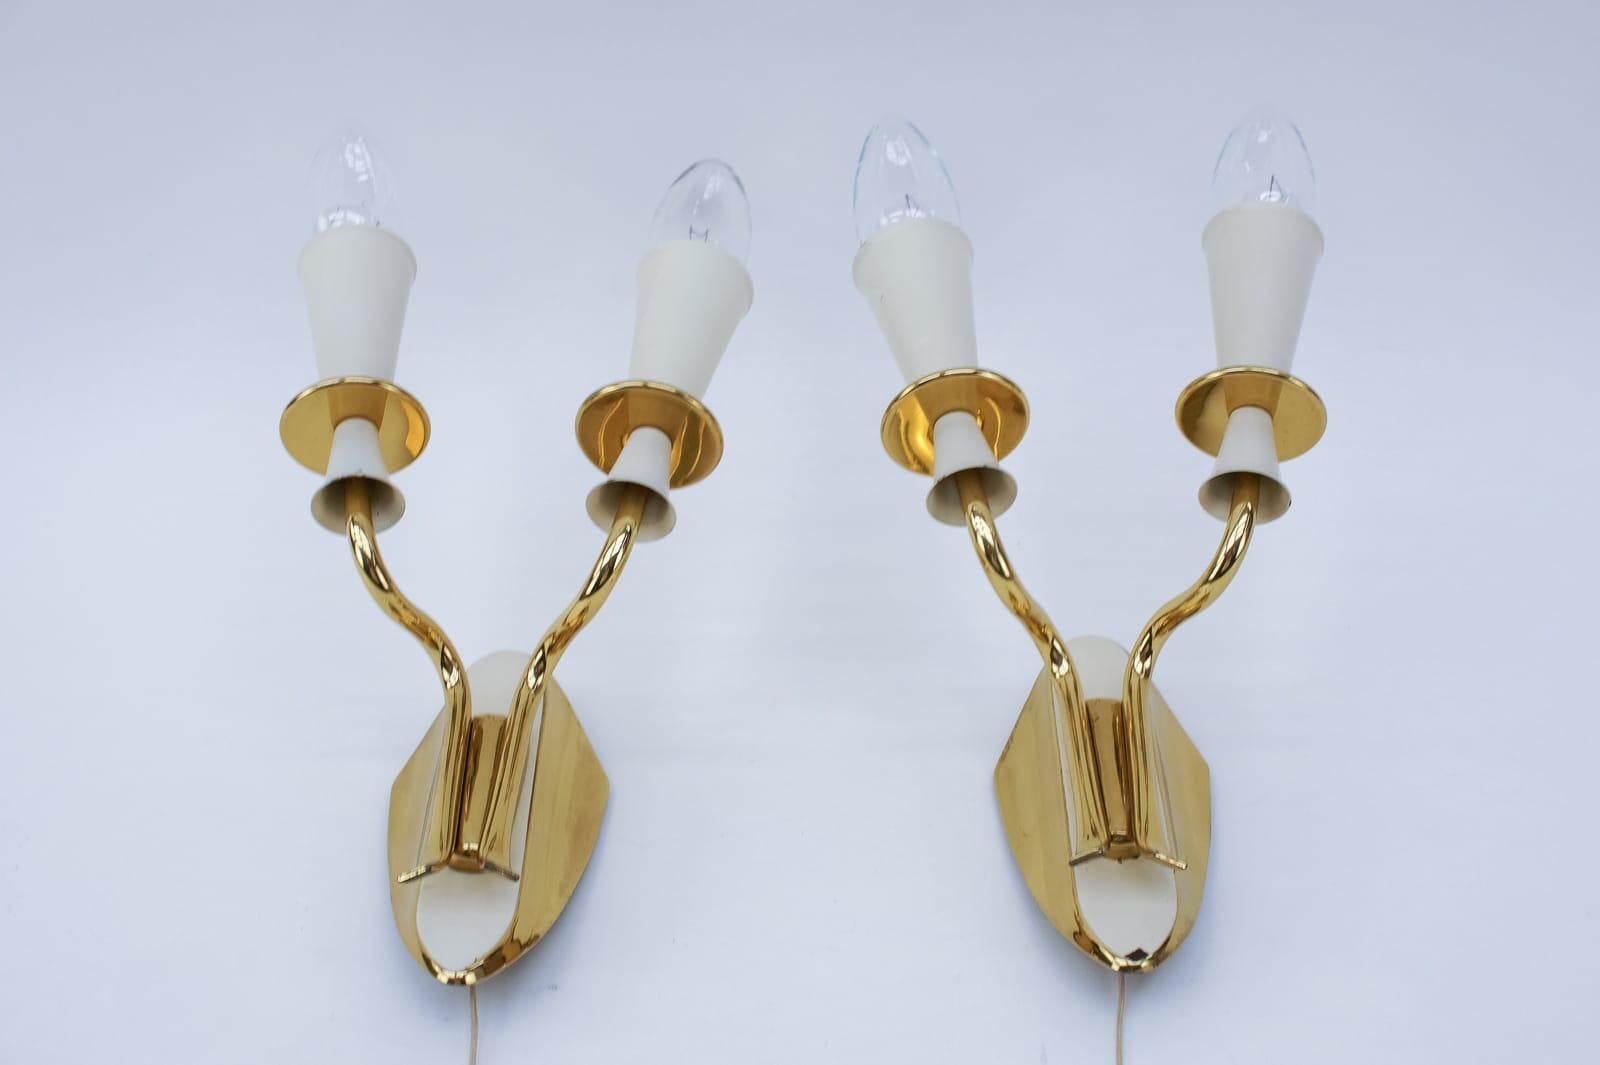 Italian Pair of Double Arm Brass Wall Lamps from the 1950s For Sale